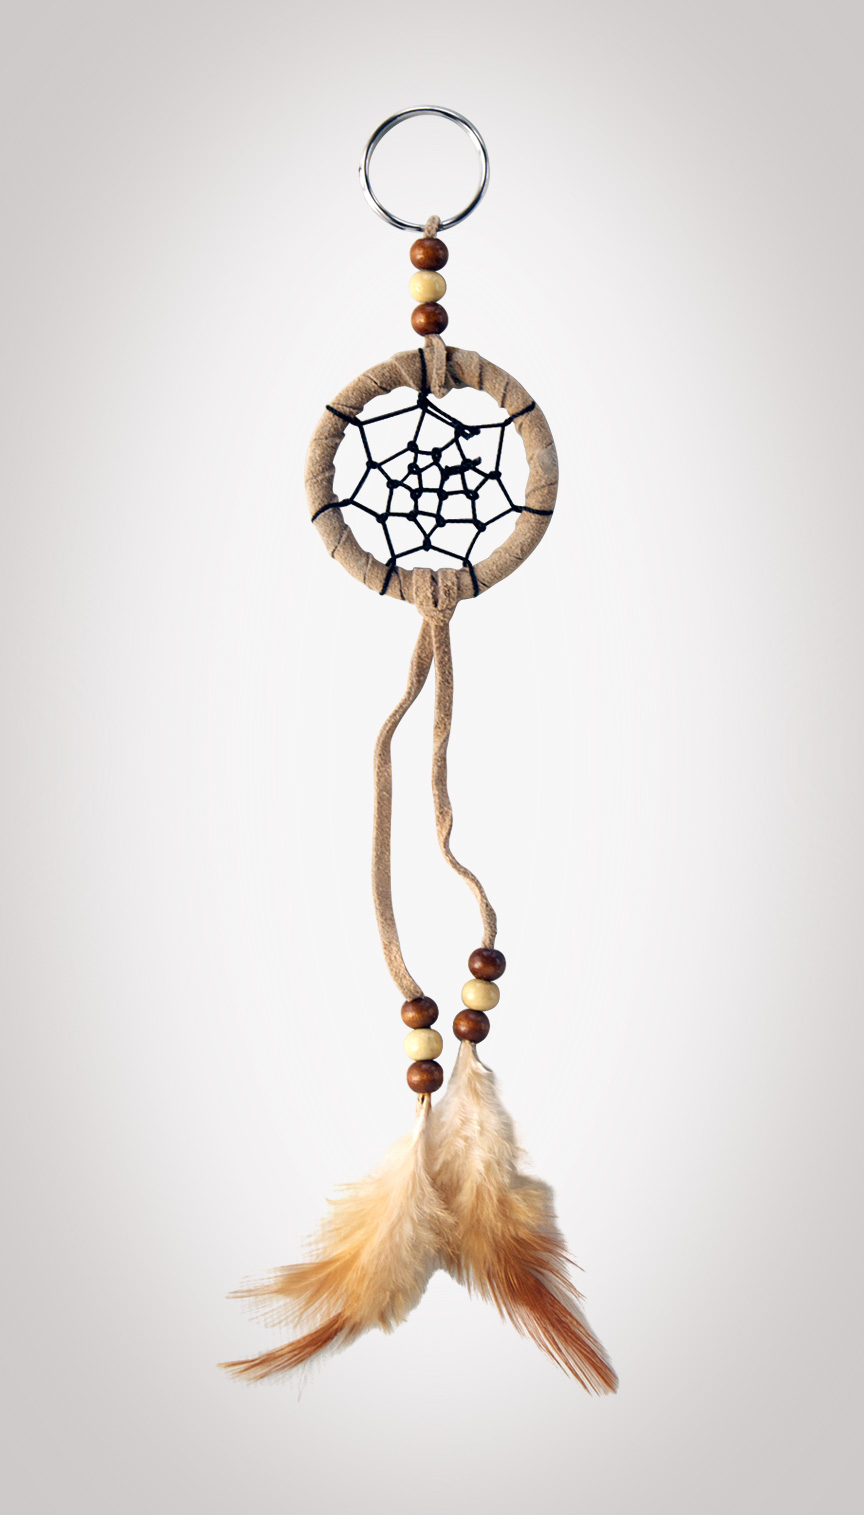 Shows an image of our dreamcatcher owg008